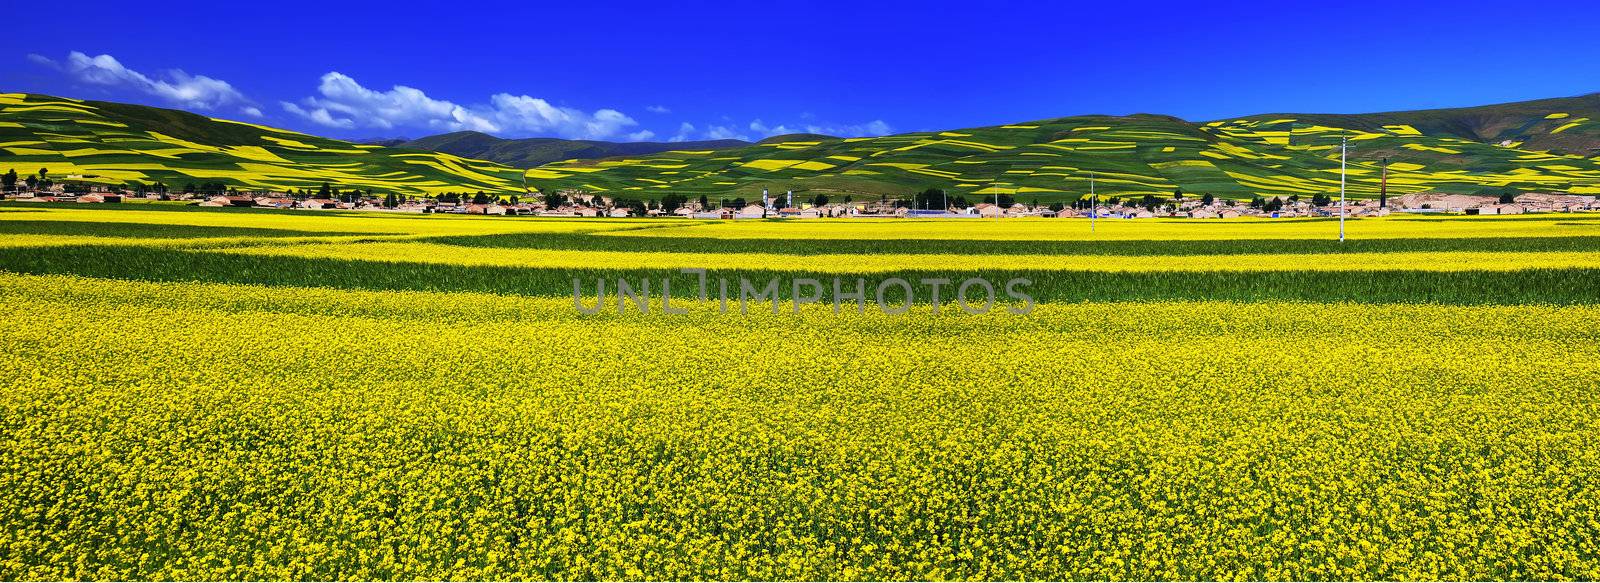 Valley and yellow field with oil seed rape in summe